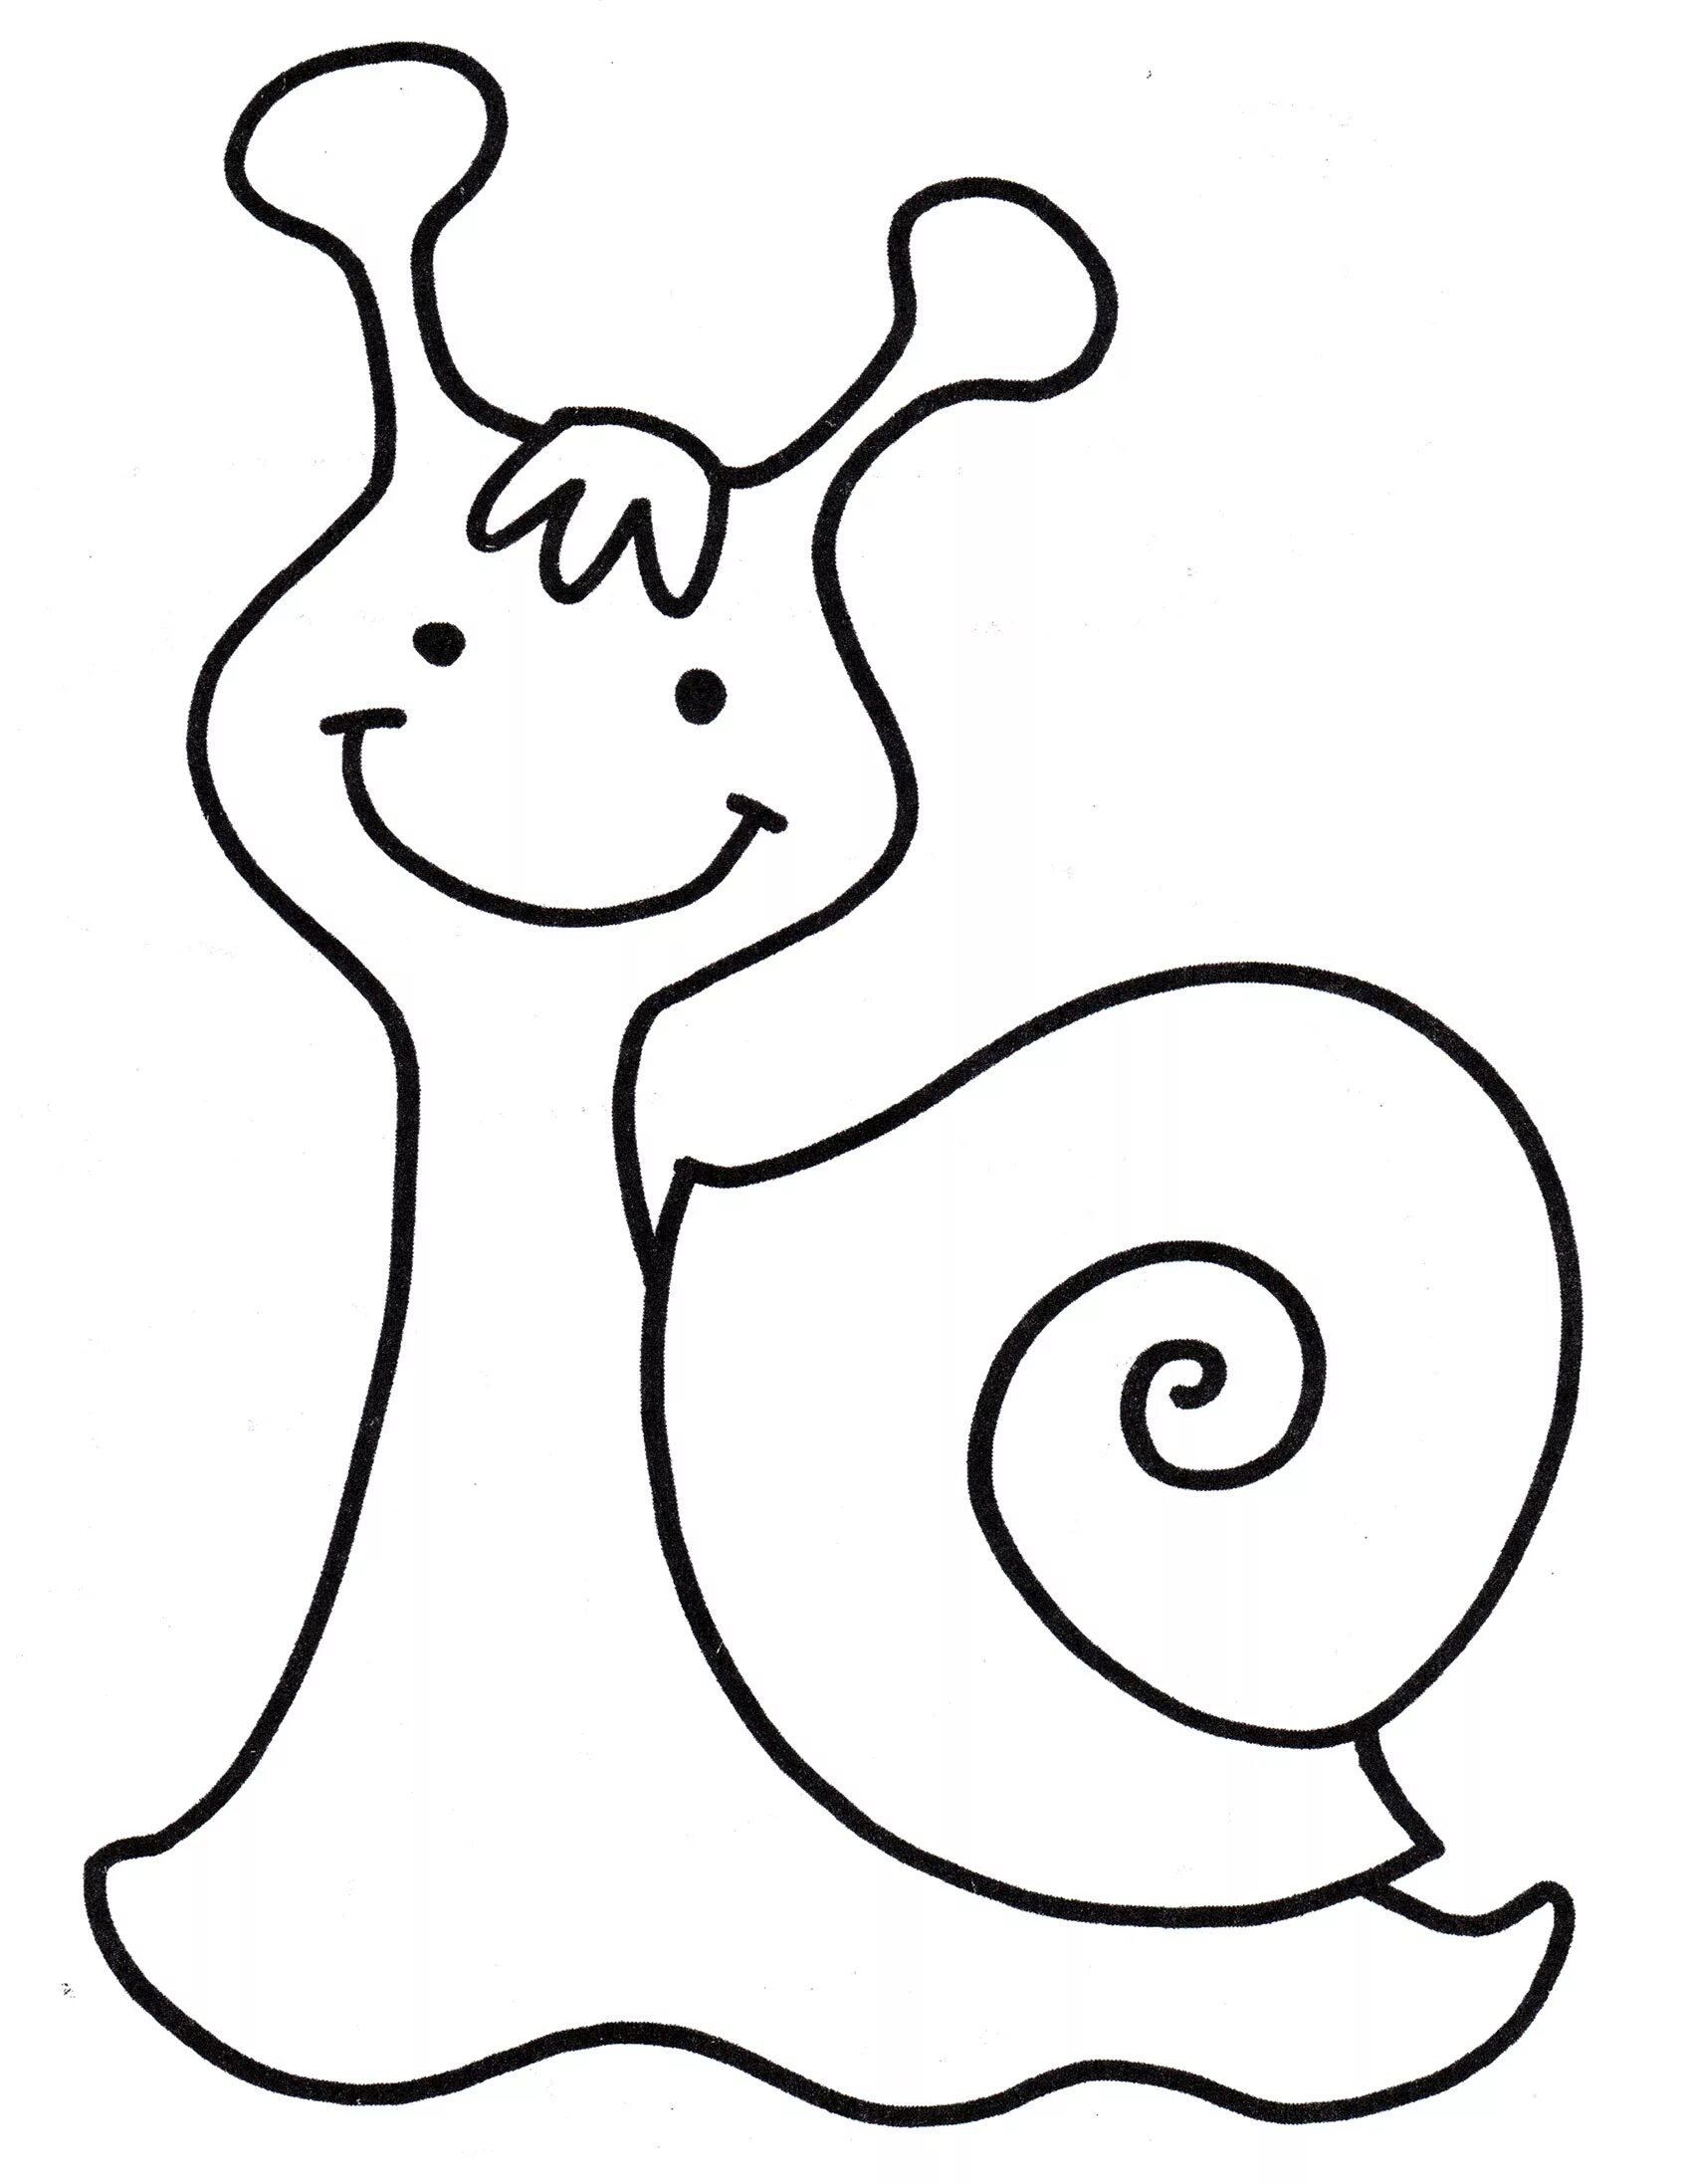 Adorable snail coloring book for 3-4 year olds